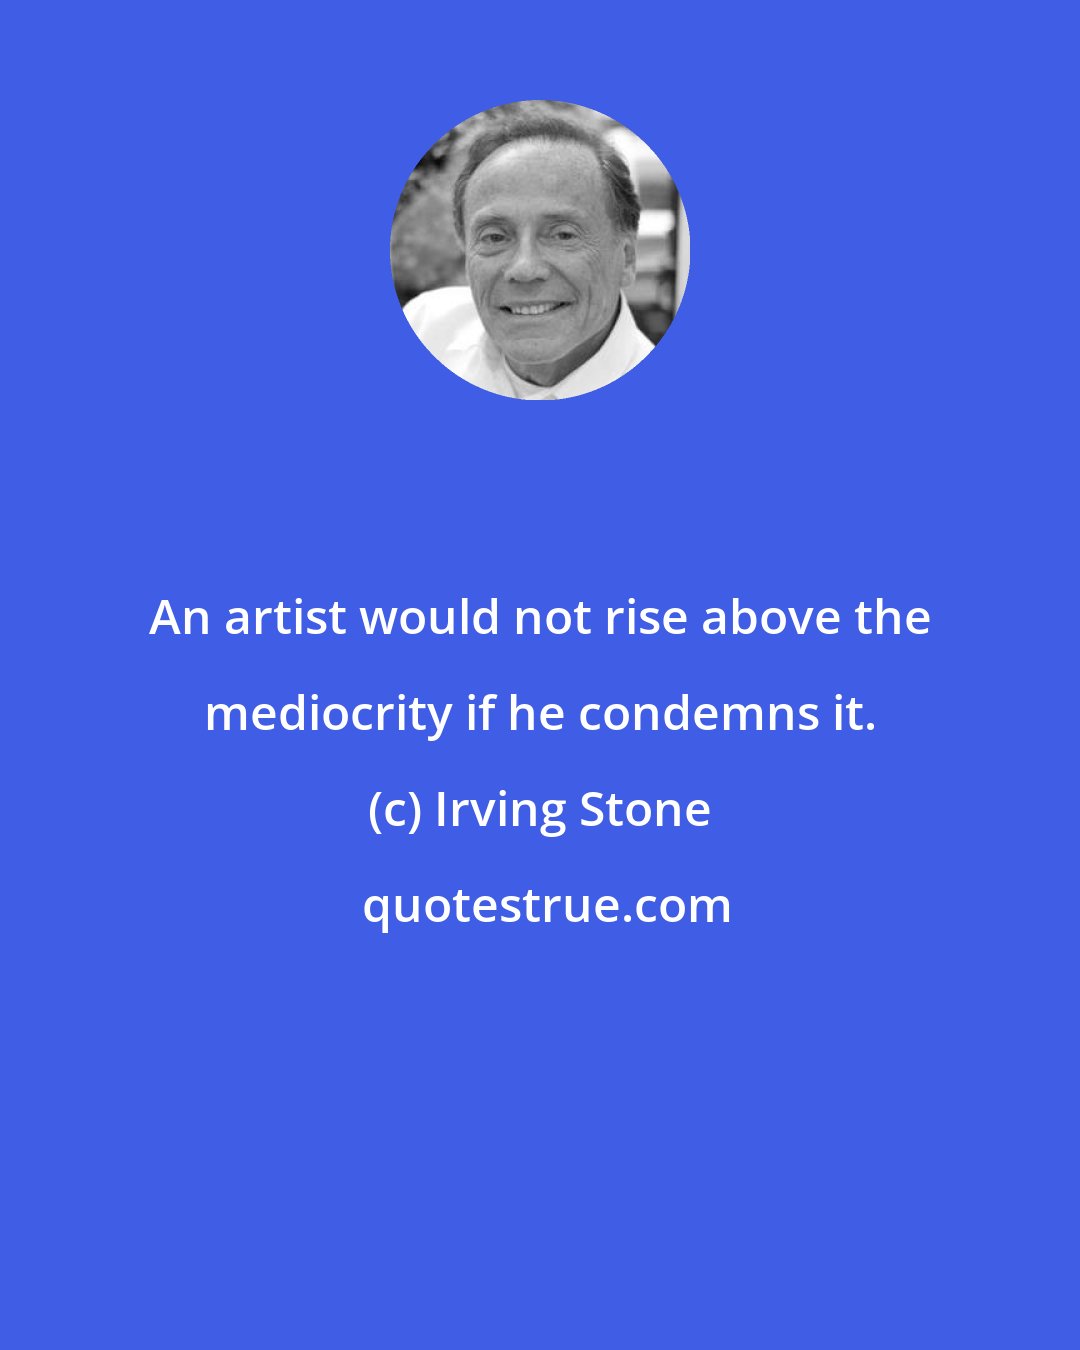 Irving Stone: An artist would not rise above the mediocrity if he condemns it.